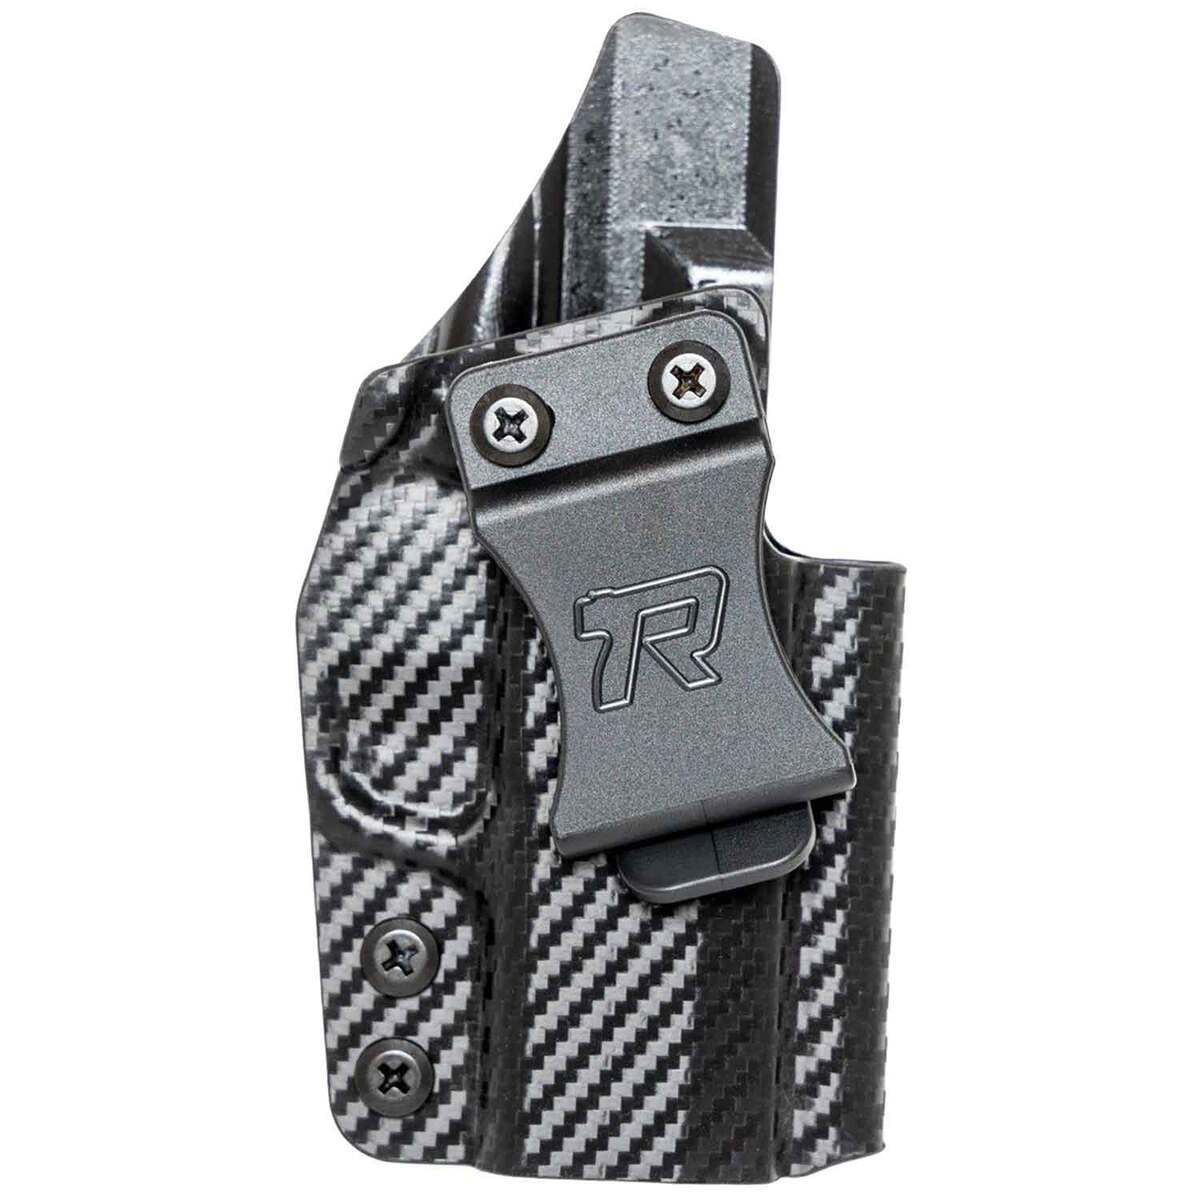 Springfield Hellcat Pro IWB Kydex Holster (Optic Ready) by Rounded Gear Carbon Fiber Black / Right Hand / Optic Cut